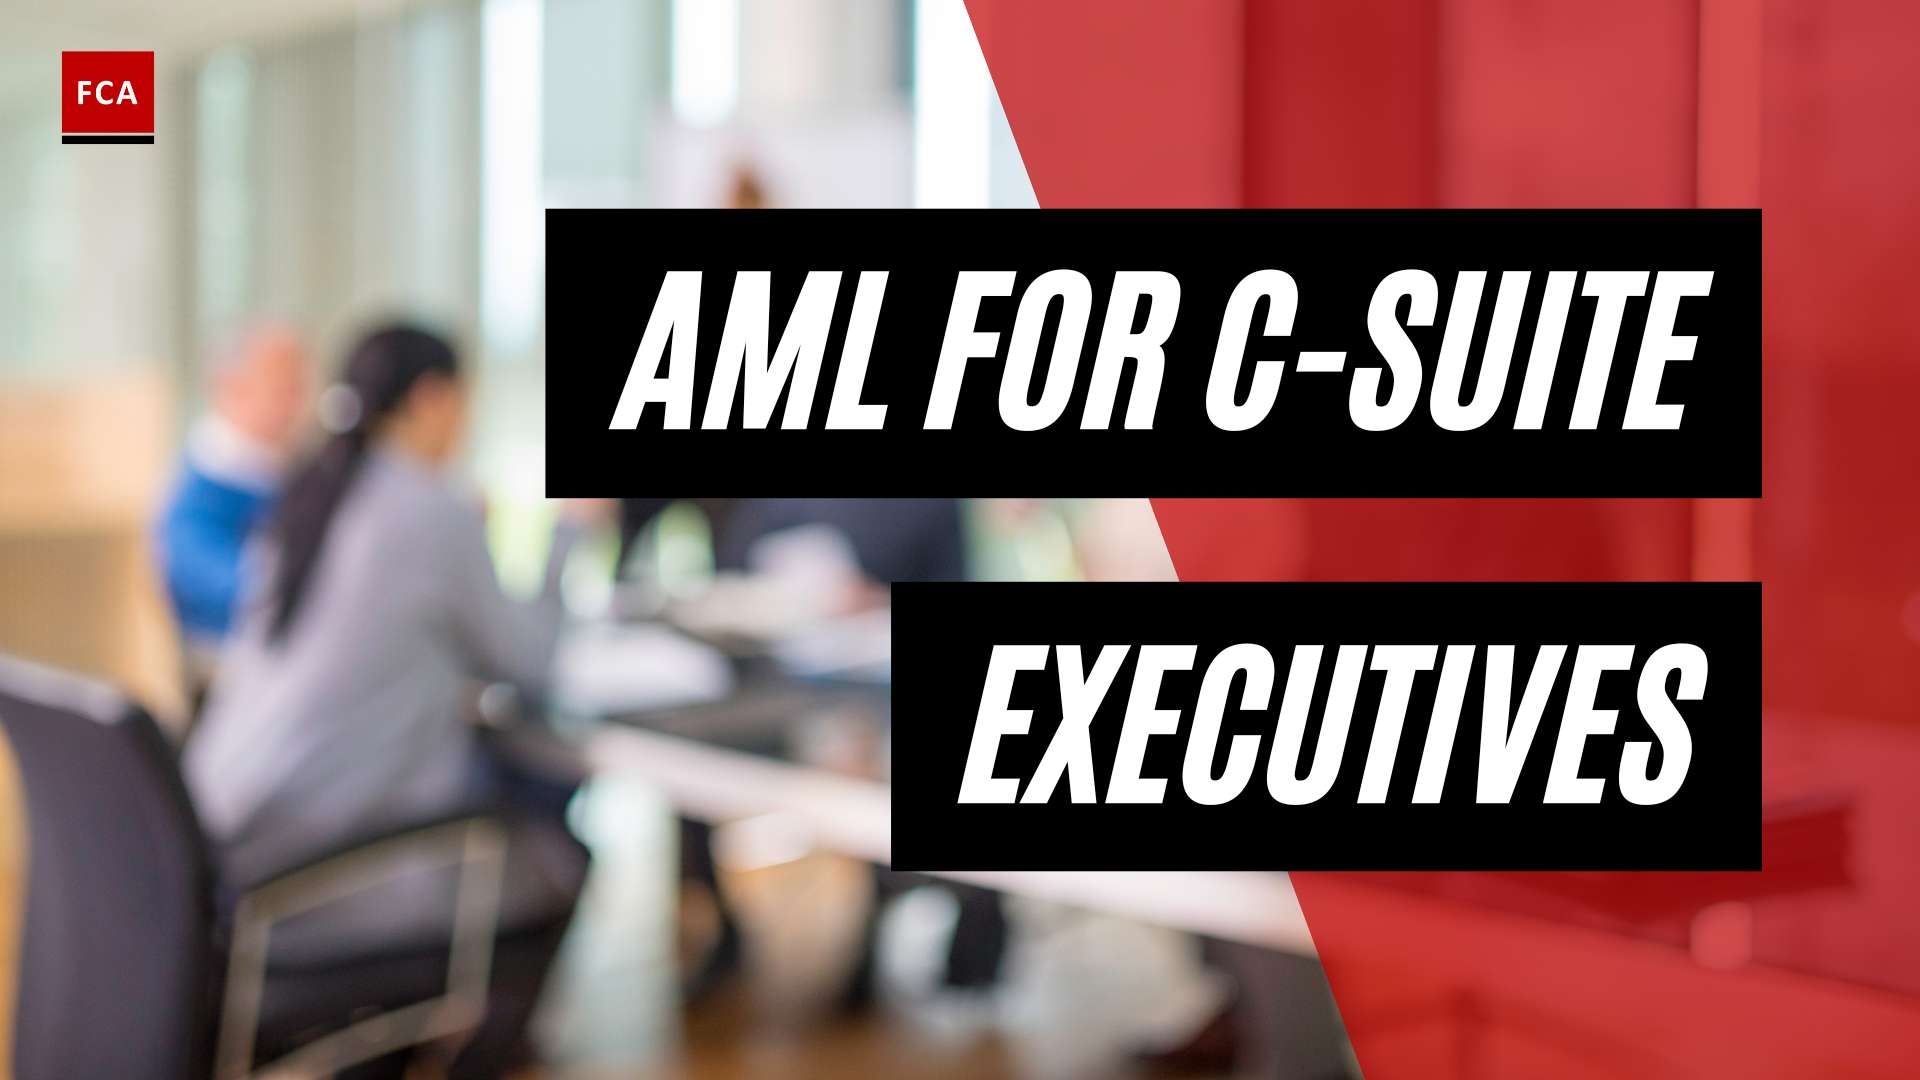 The Executive Advantage: Aml Training For C-Suite Leaders